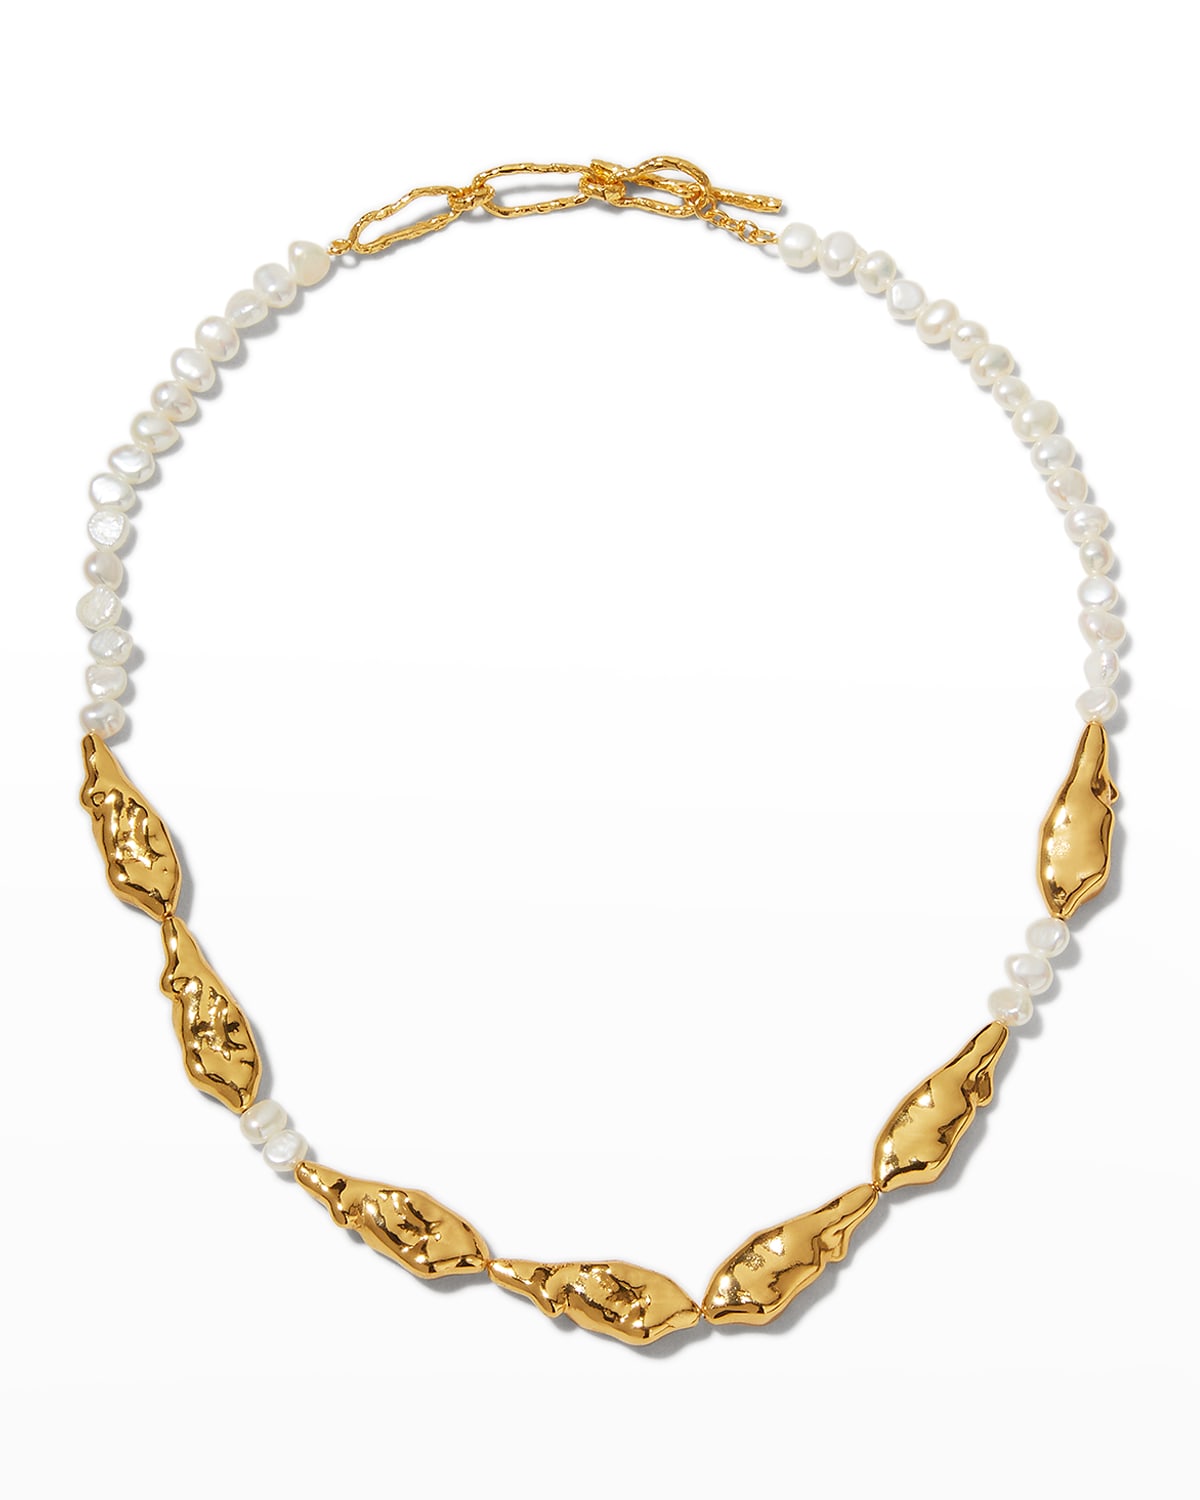 Pacharee Birch Gold Necklace With Pearls